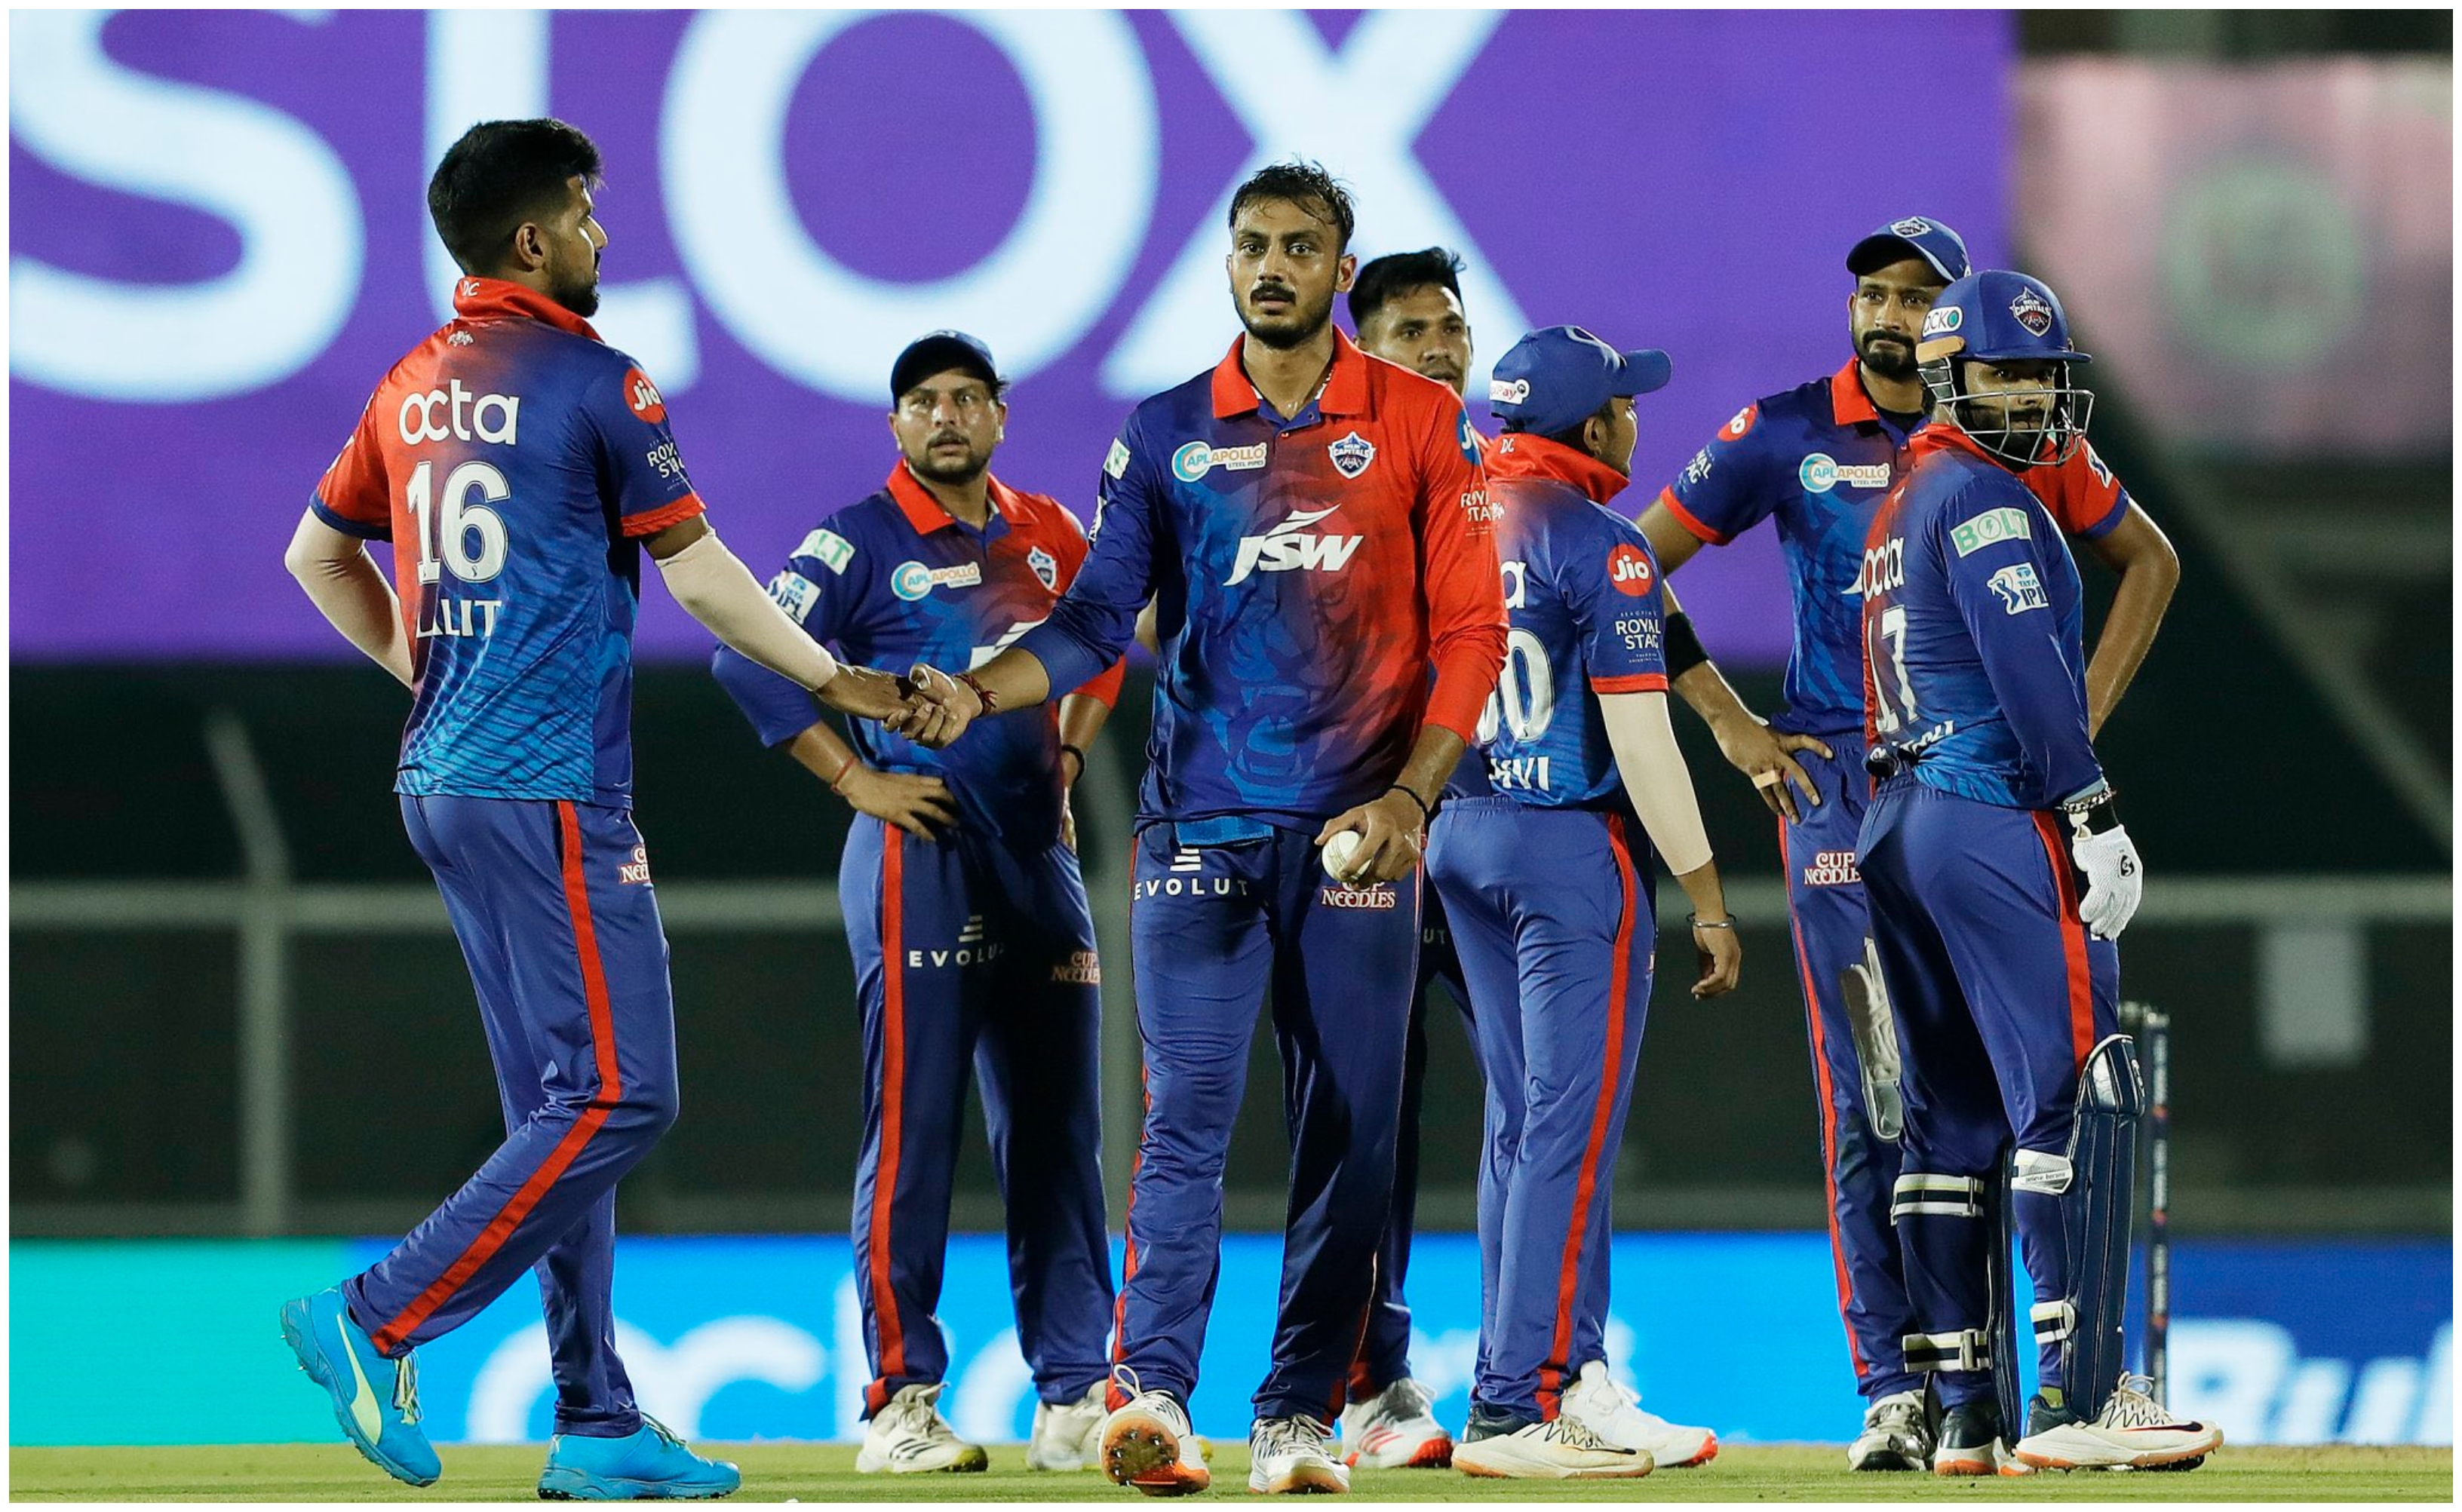 DC outplayed PBKS in all departments | BCCI/IPL